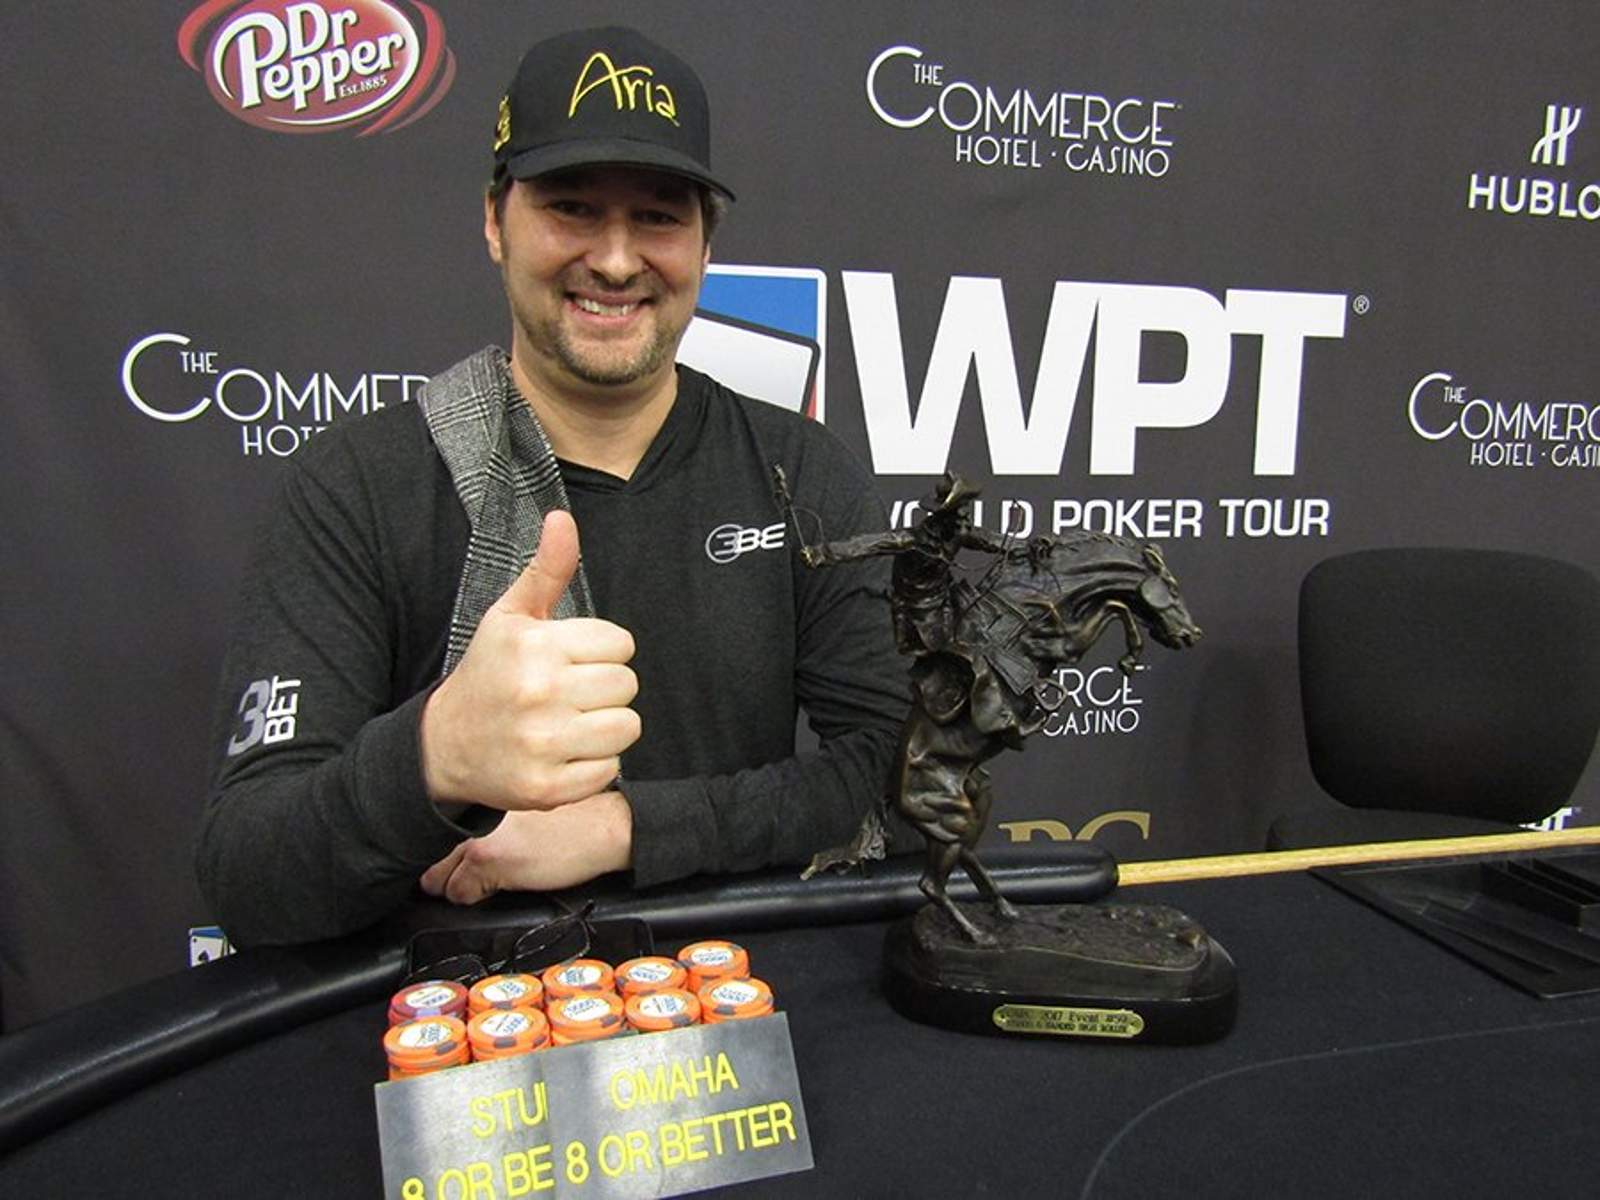 Phil Hellmuth Bests Mike Matusow in LAPC Omaha HiLo Event